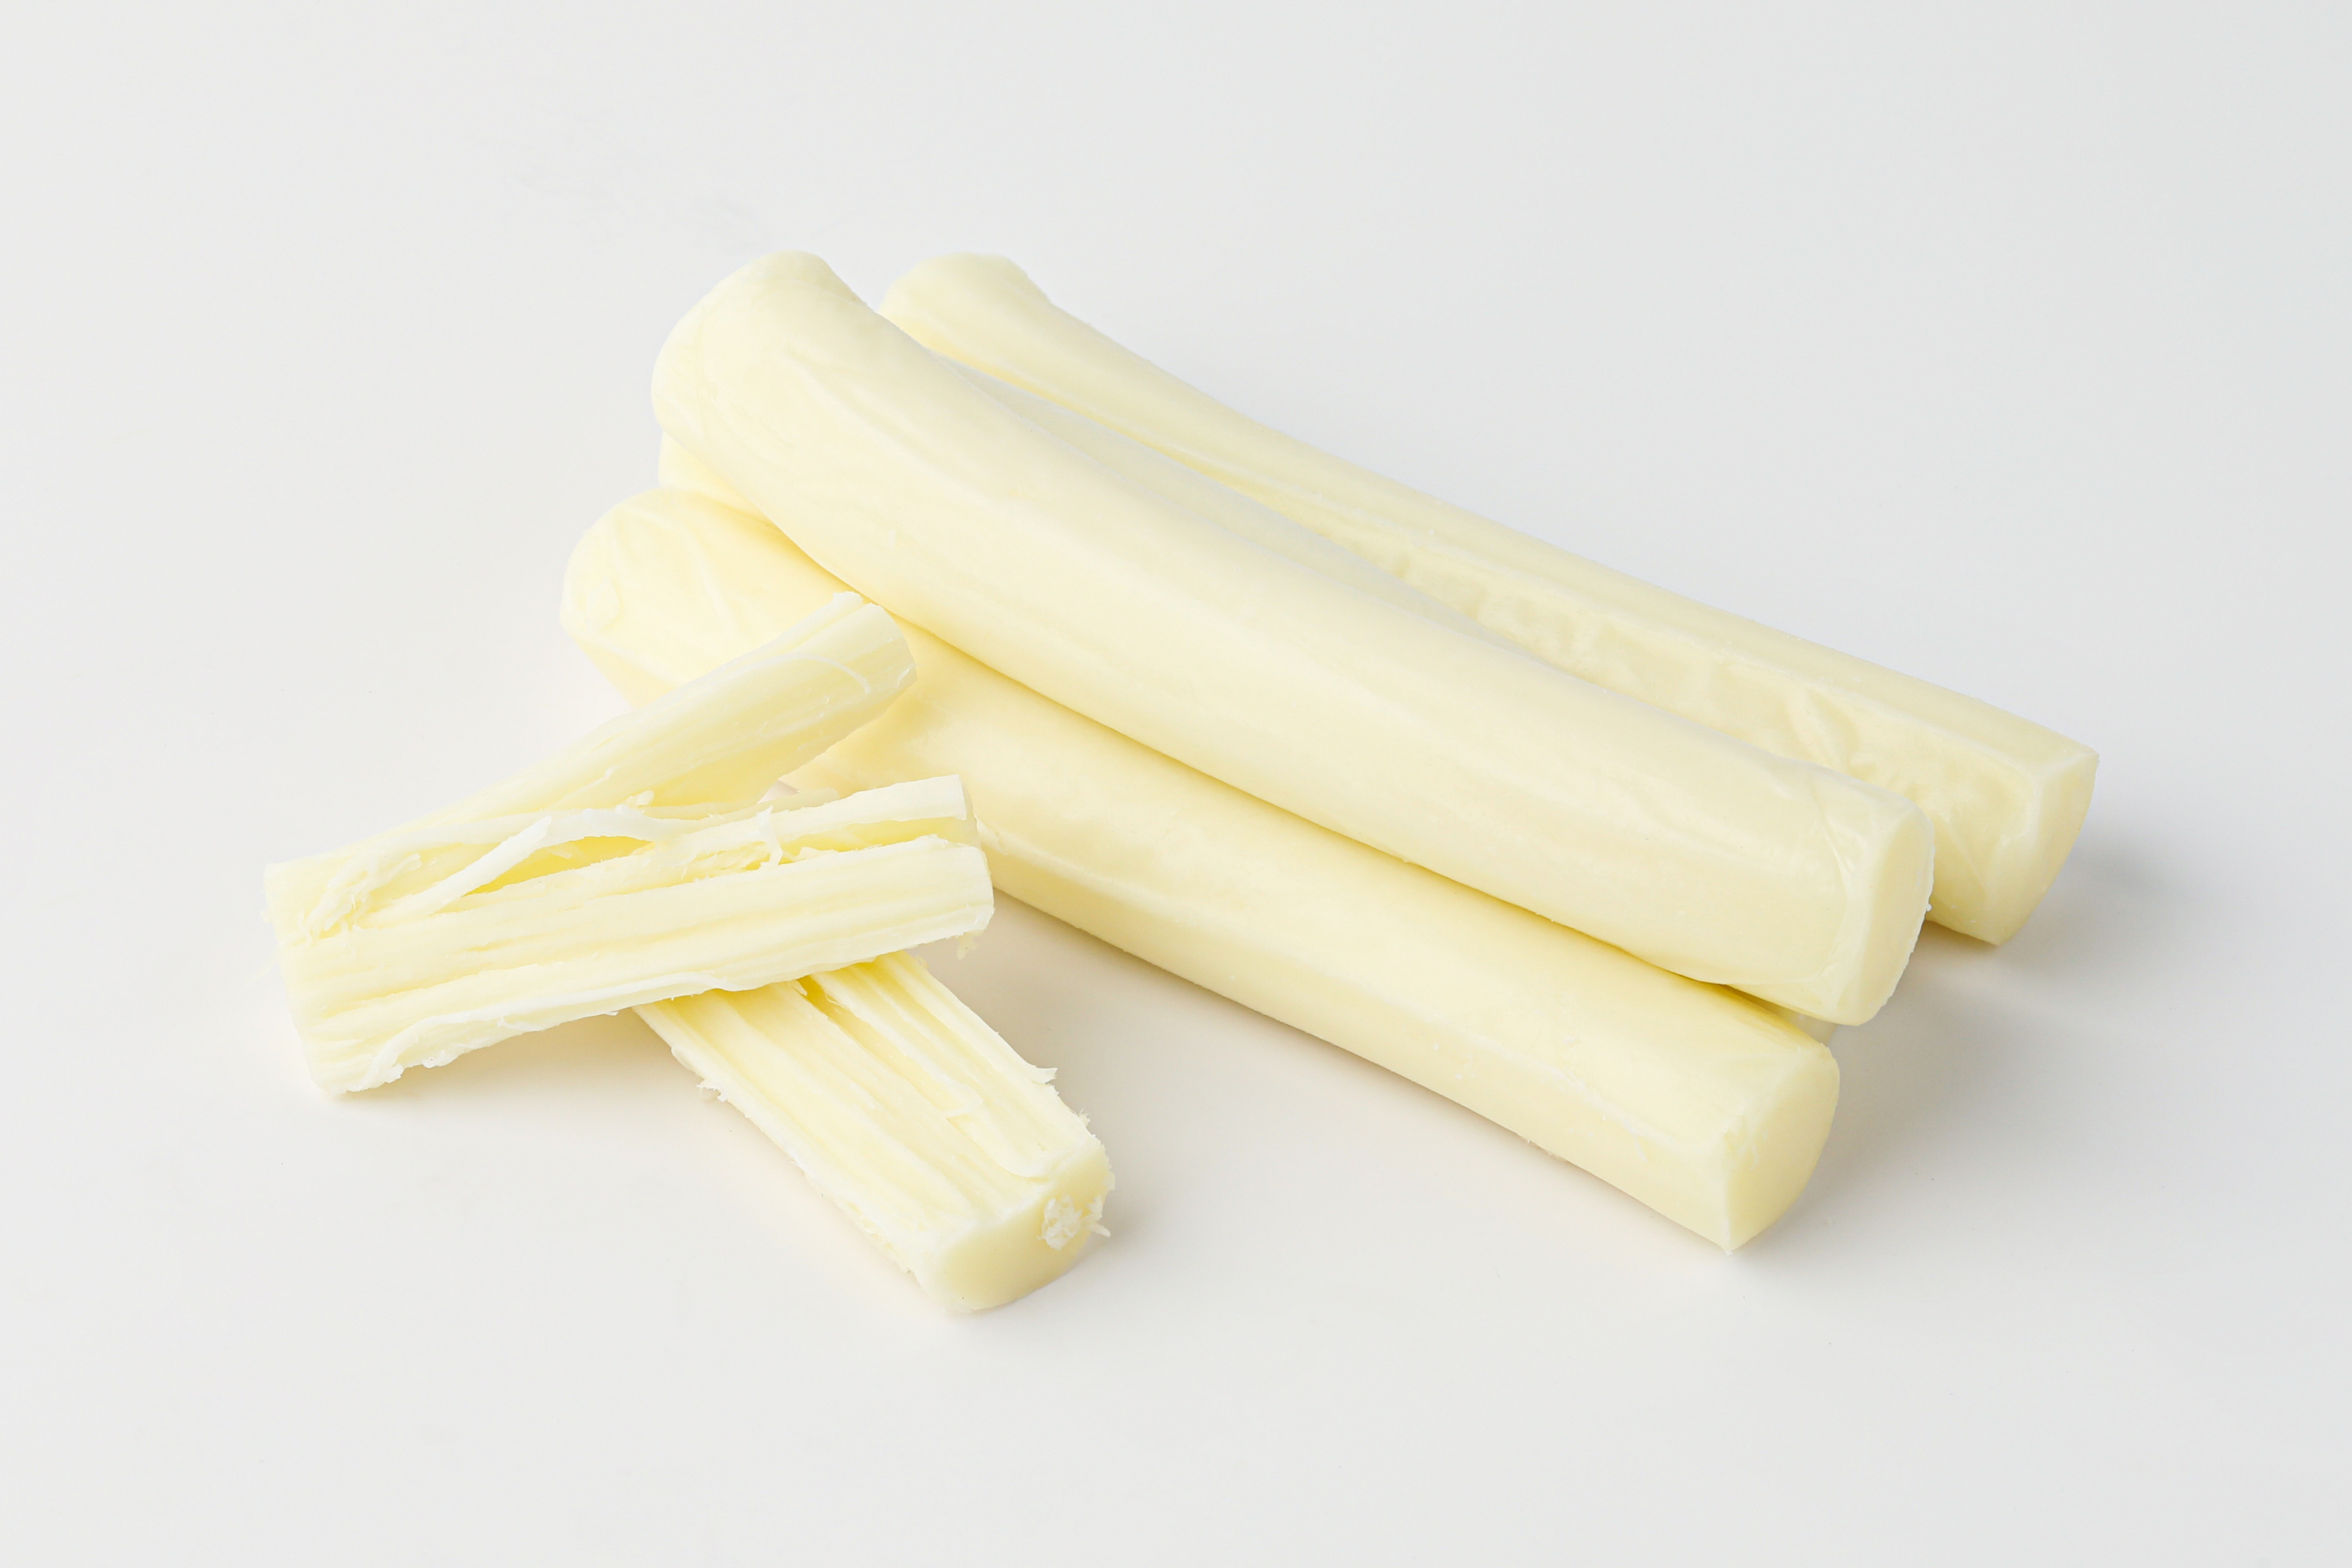 Image of a pile of string cheese sticks on a plain background